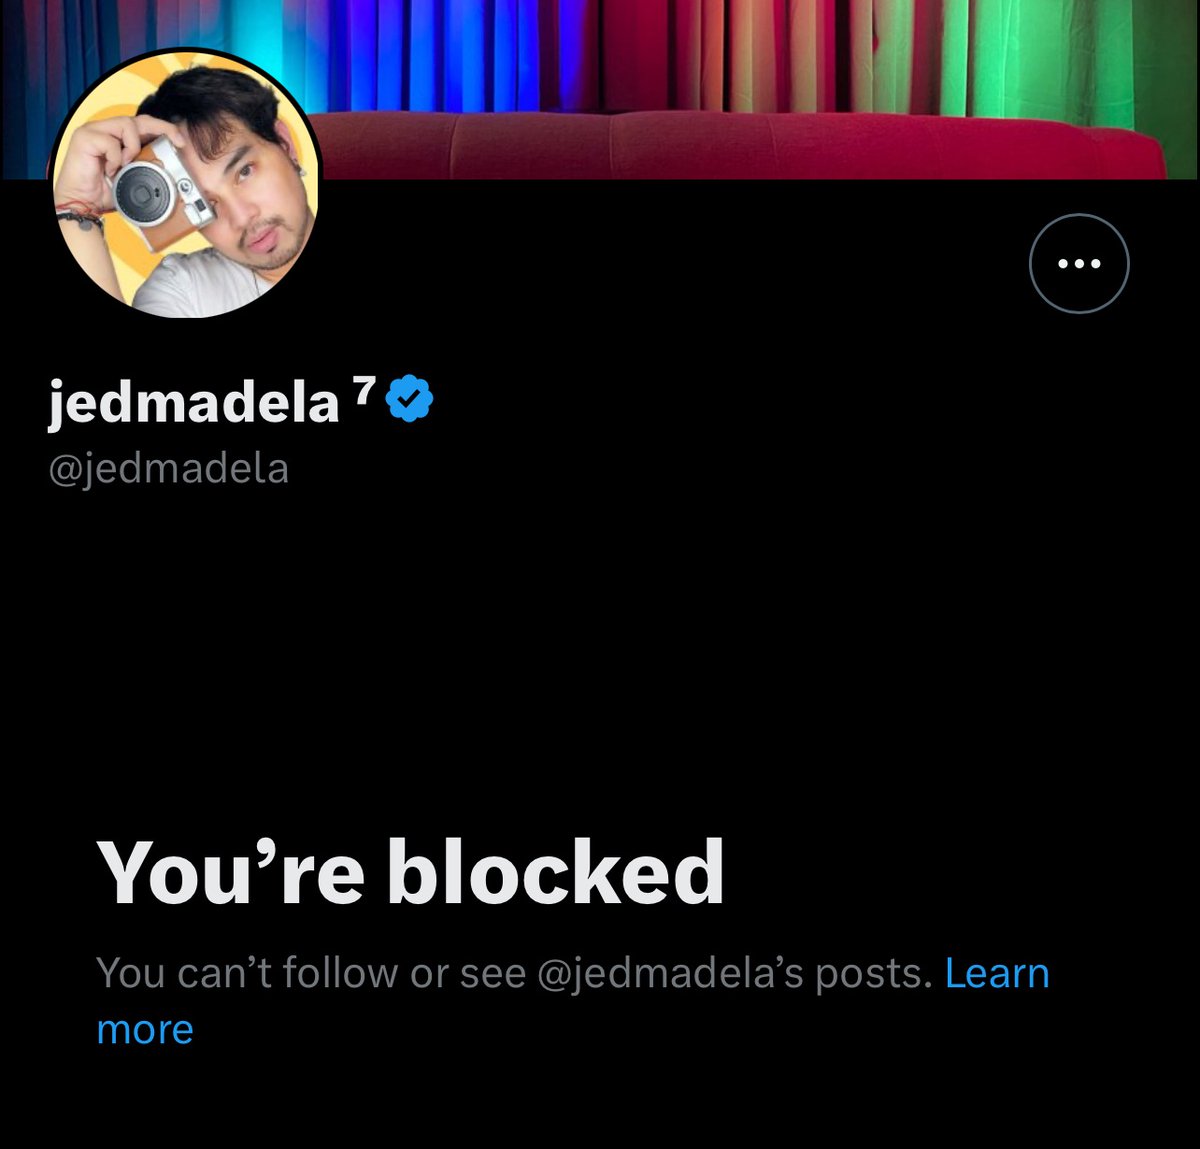 Kween Jed Madela, my fave DDS singer, blocked me 😭😭😭🥹💚❤️